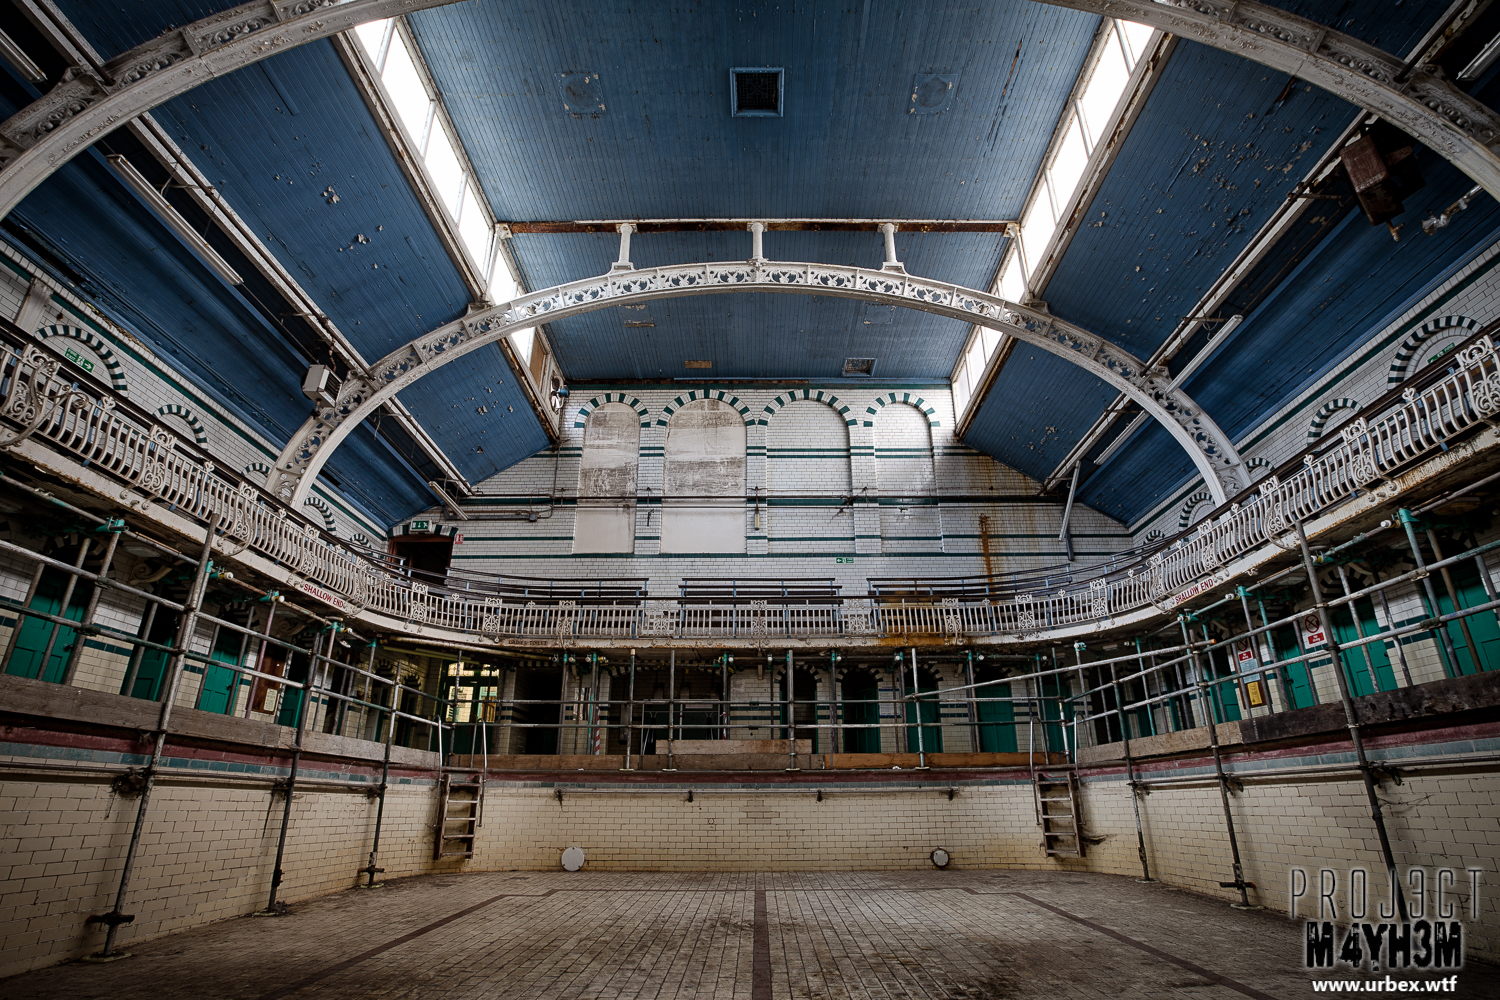 Haunting pictures show abandoned Edwardian swimming pool 